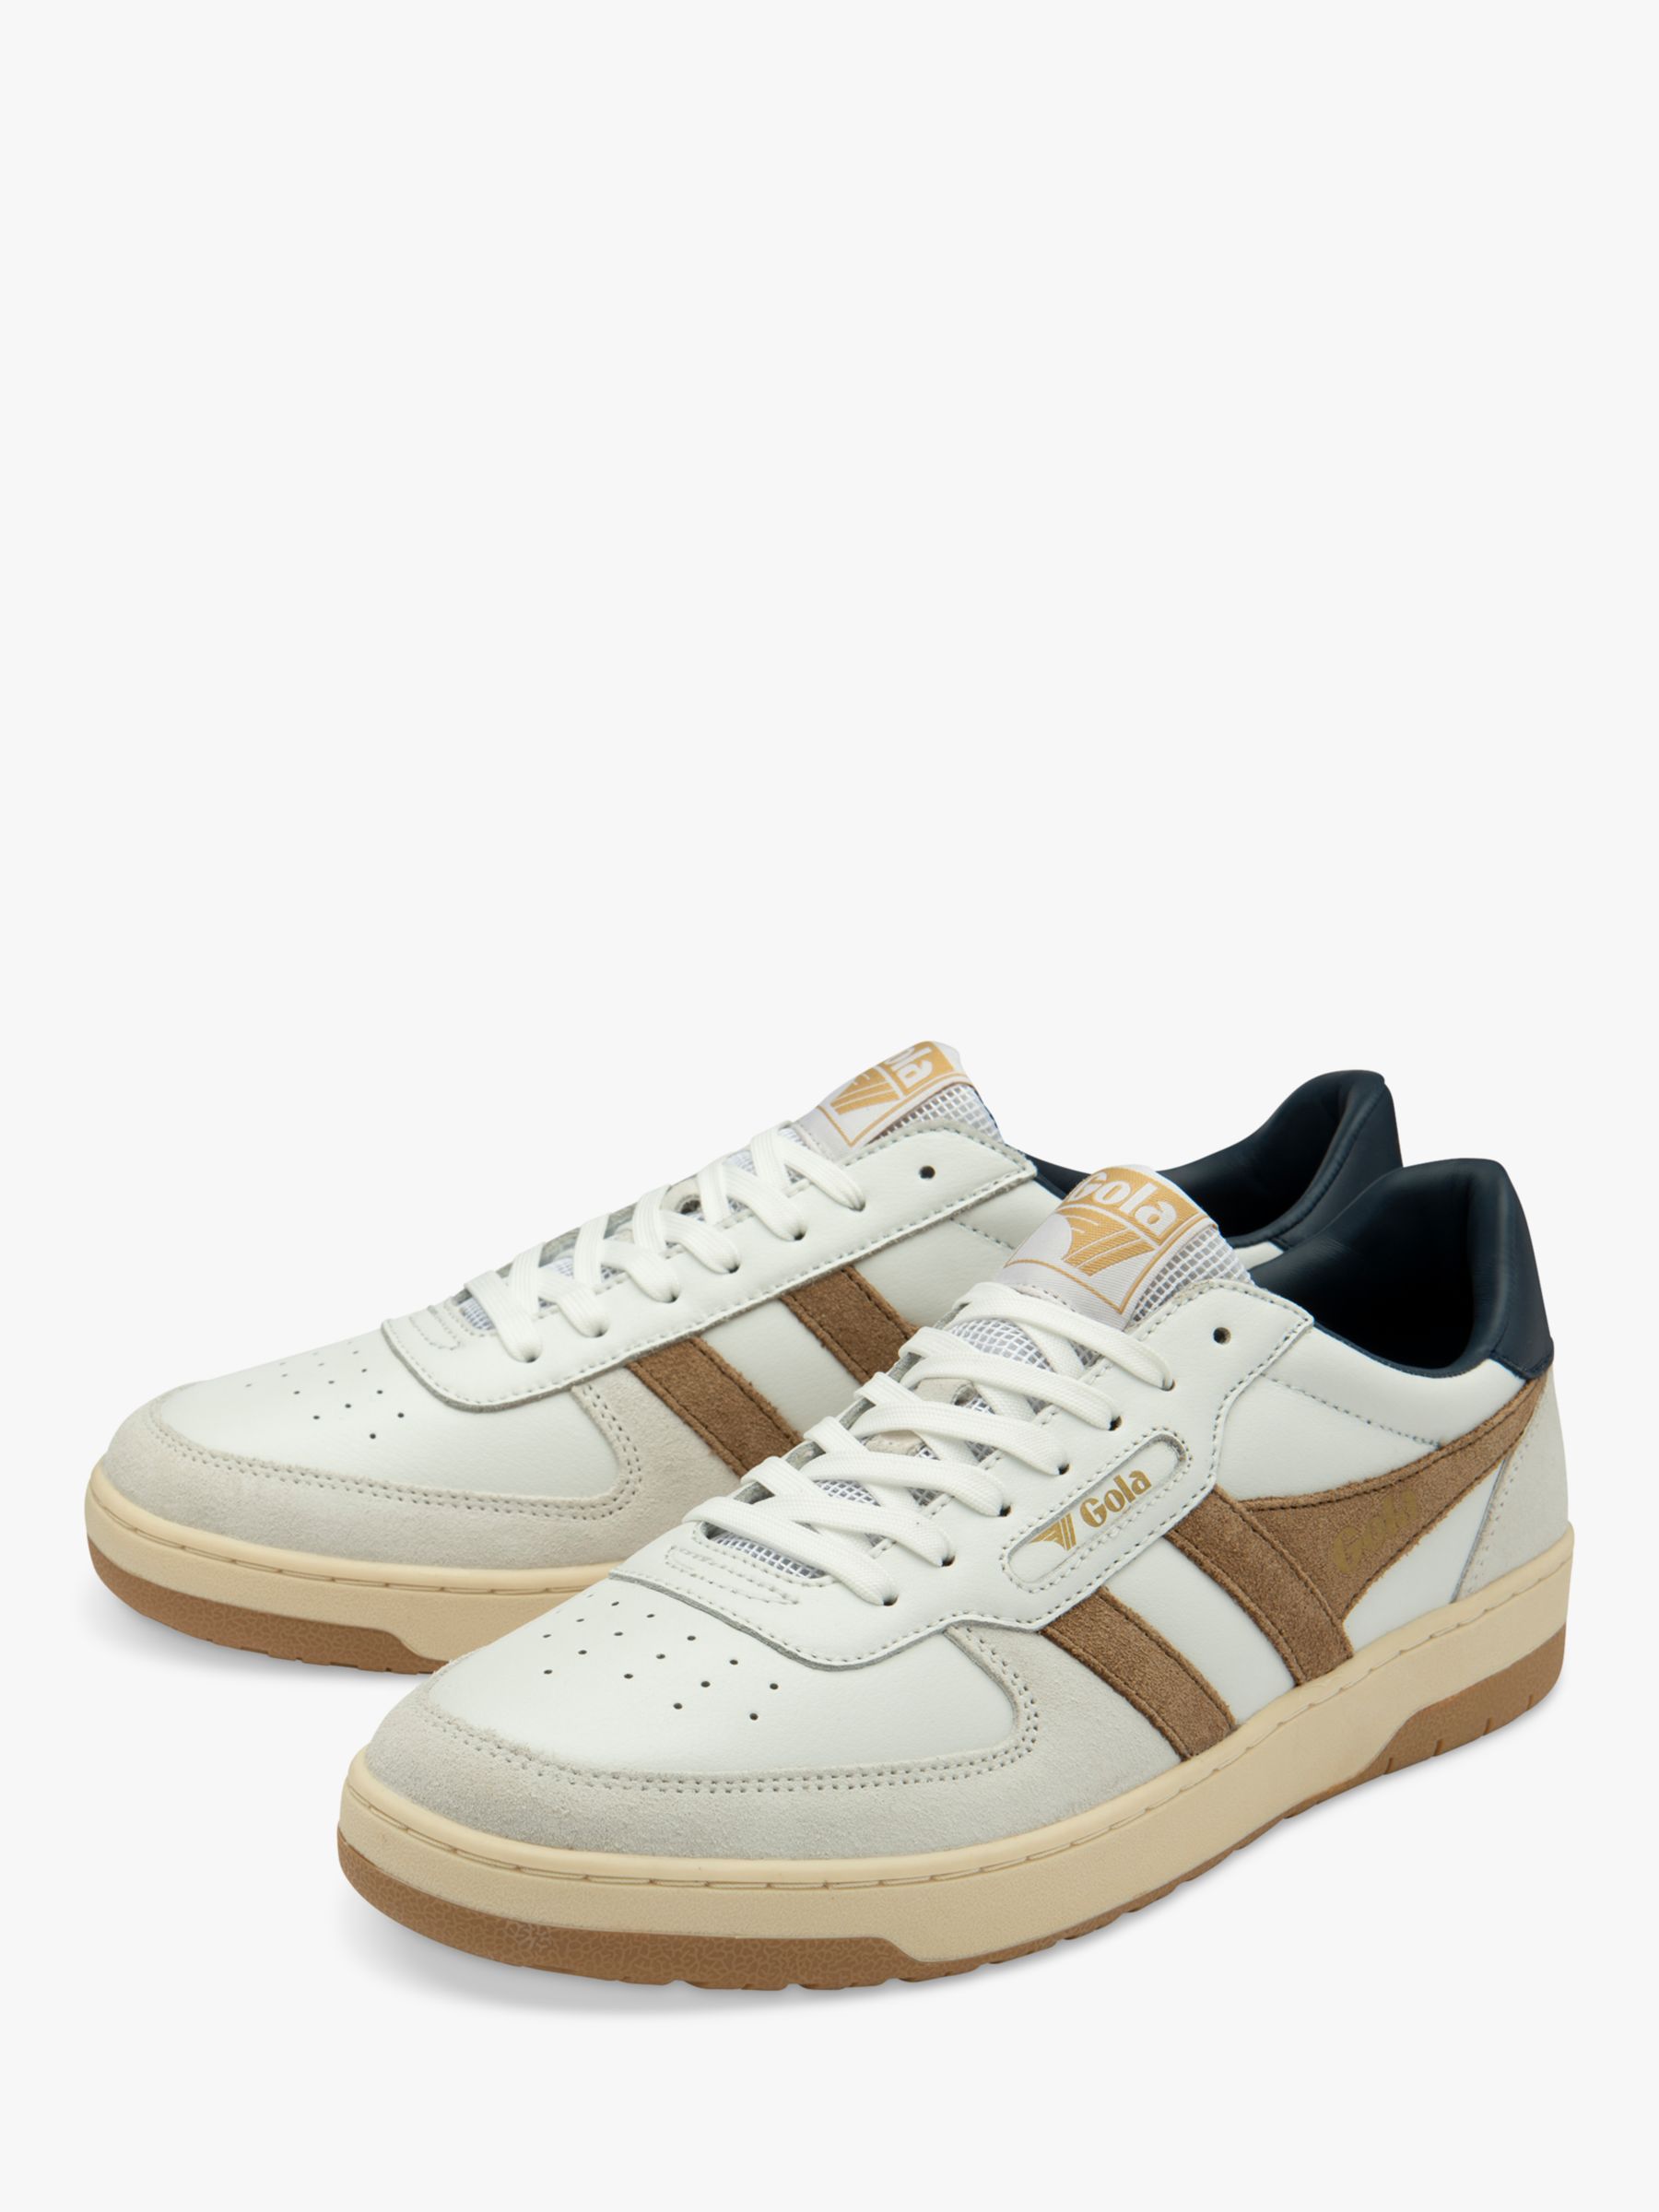 Gola Classics Hawk Leather Lace Up Trainers, White/Tobacco/Navy, 6